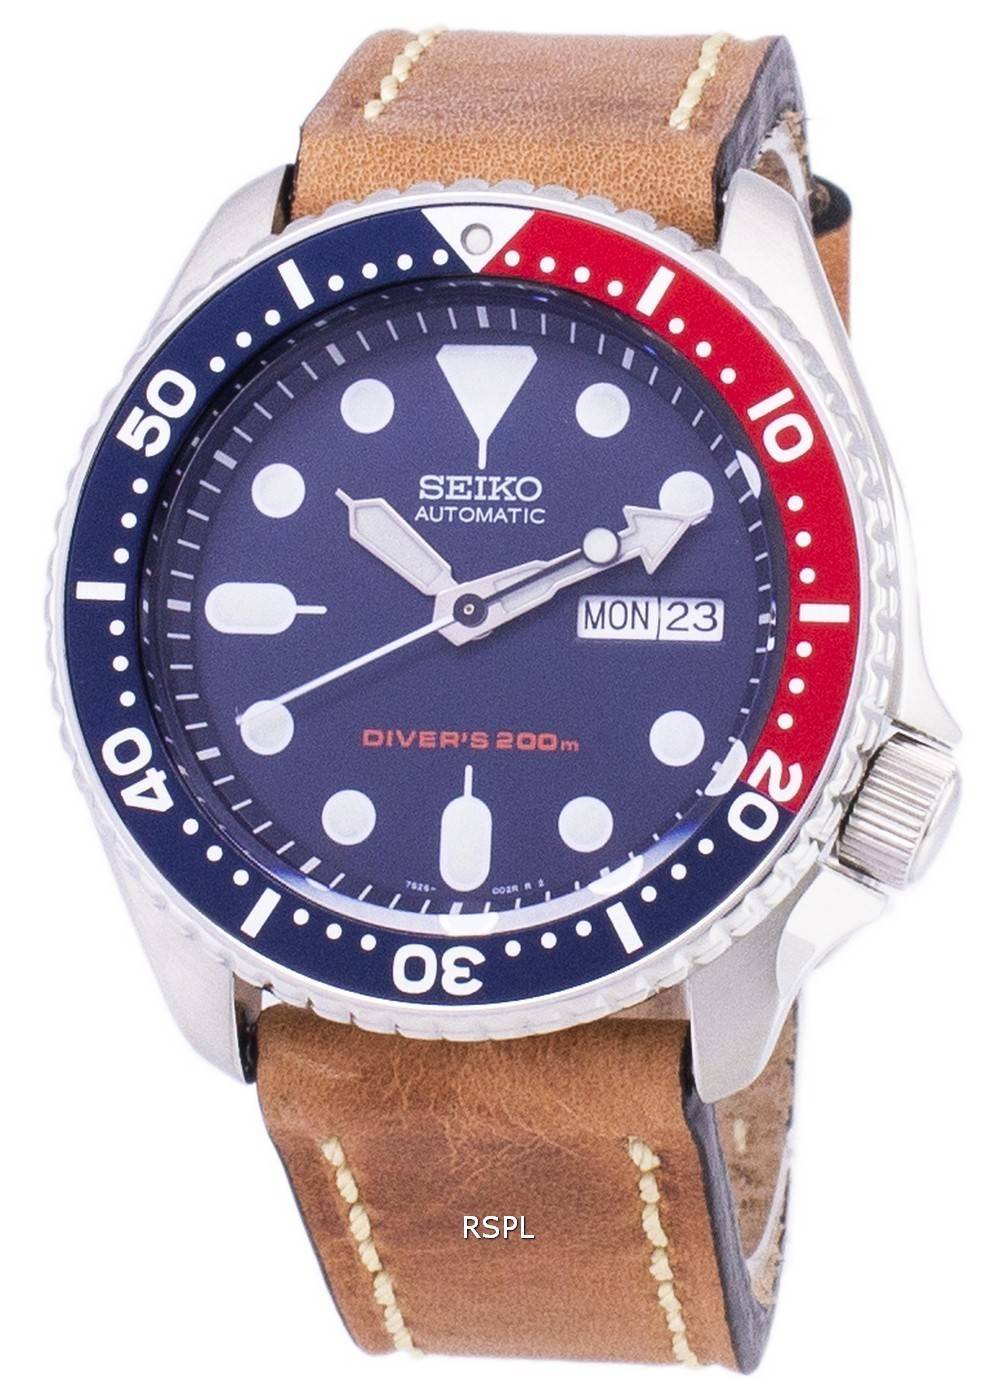 Seiko Automatic SKX009K1-LS17 Diver's 200M Brown Leather Strap Men's Watch - CityWatches.co.nz